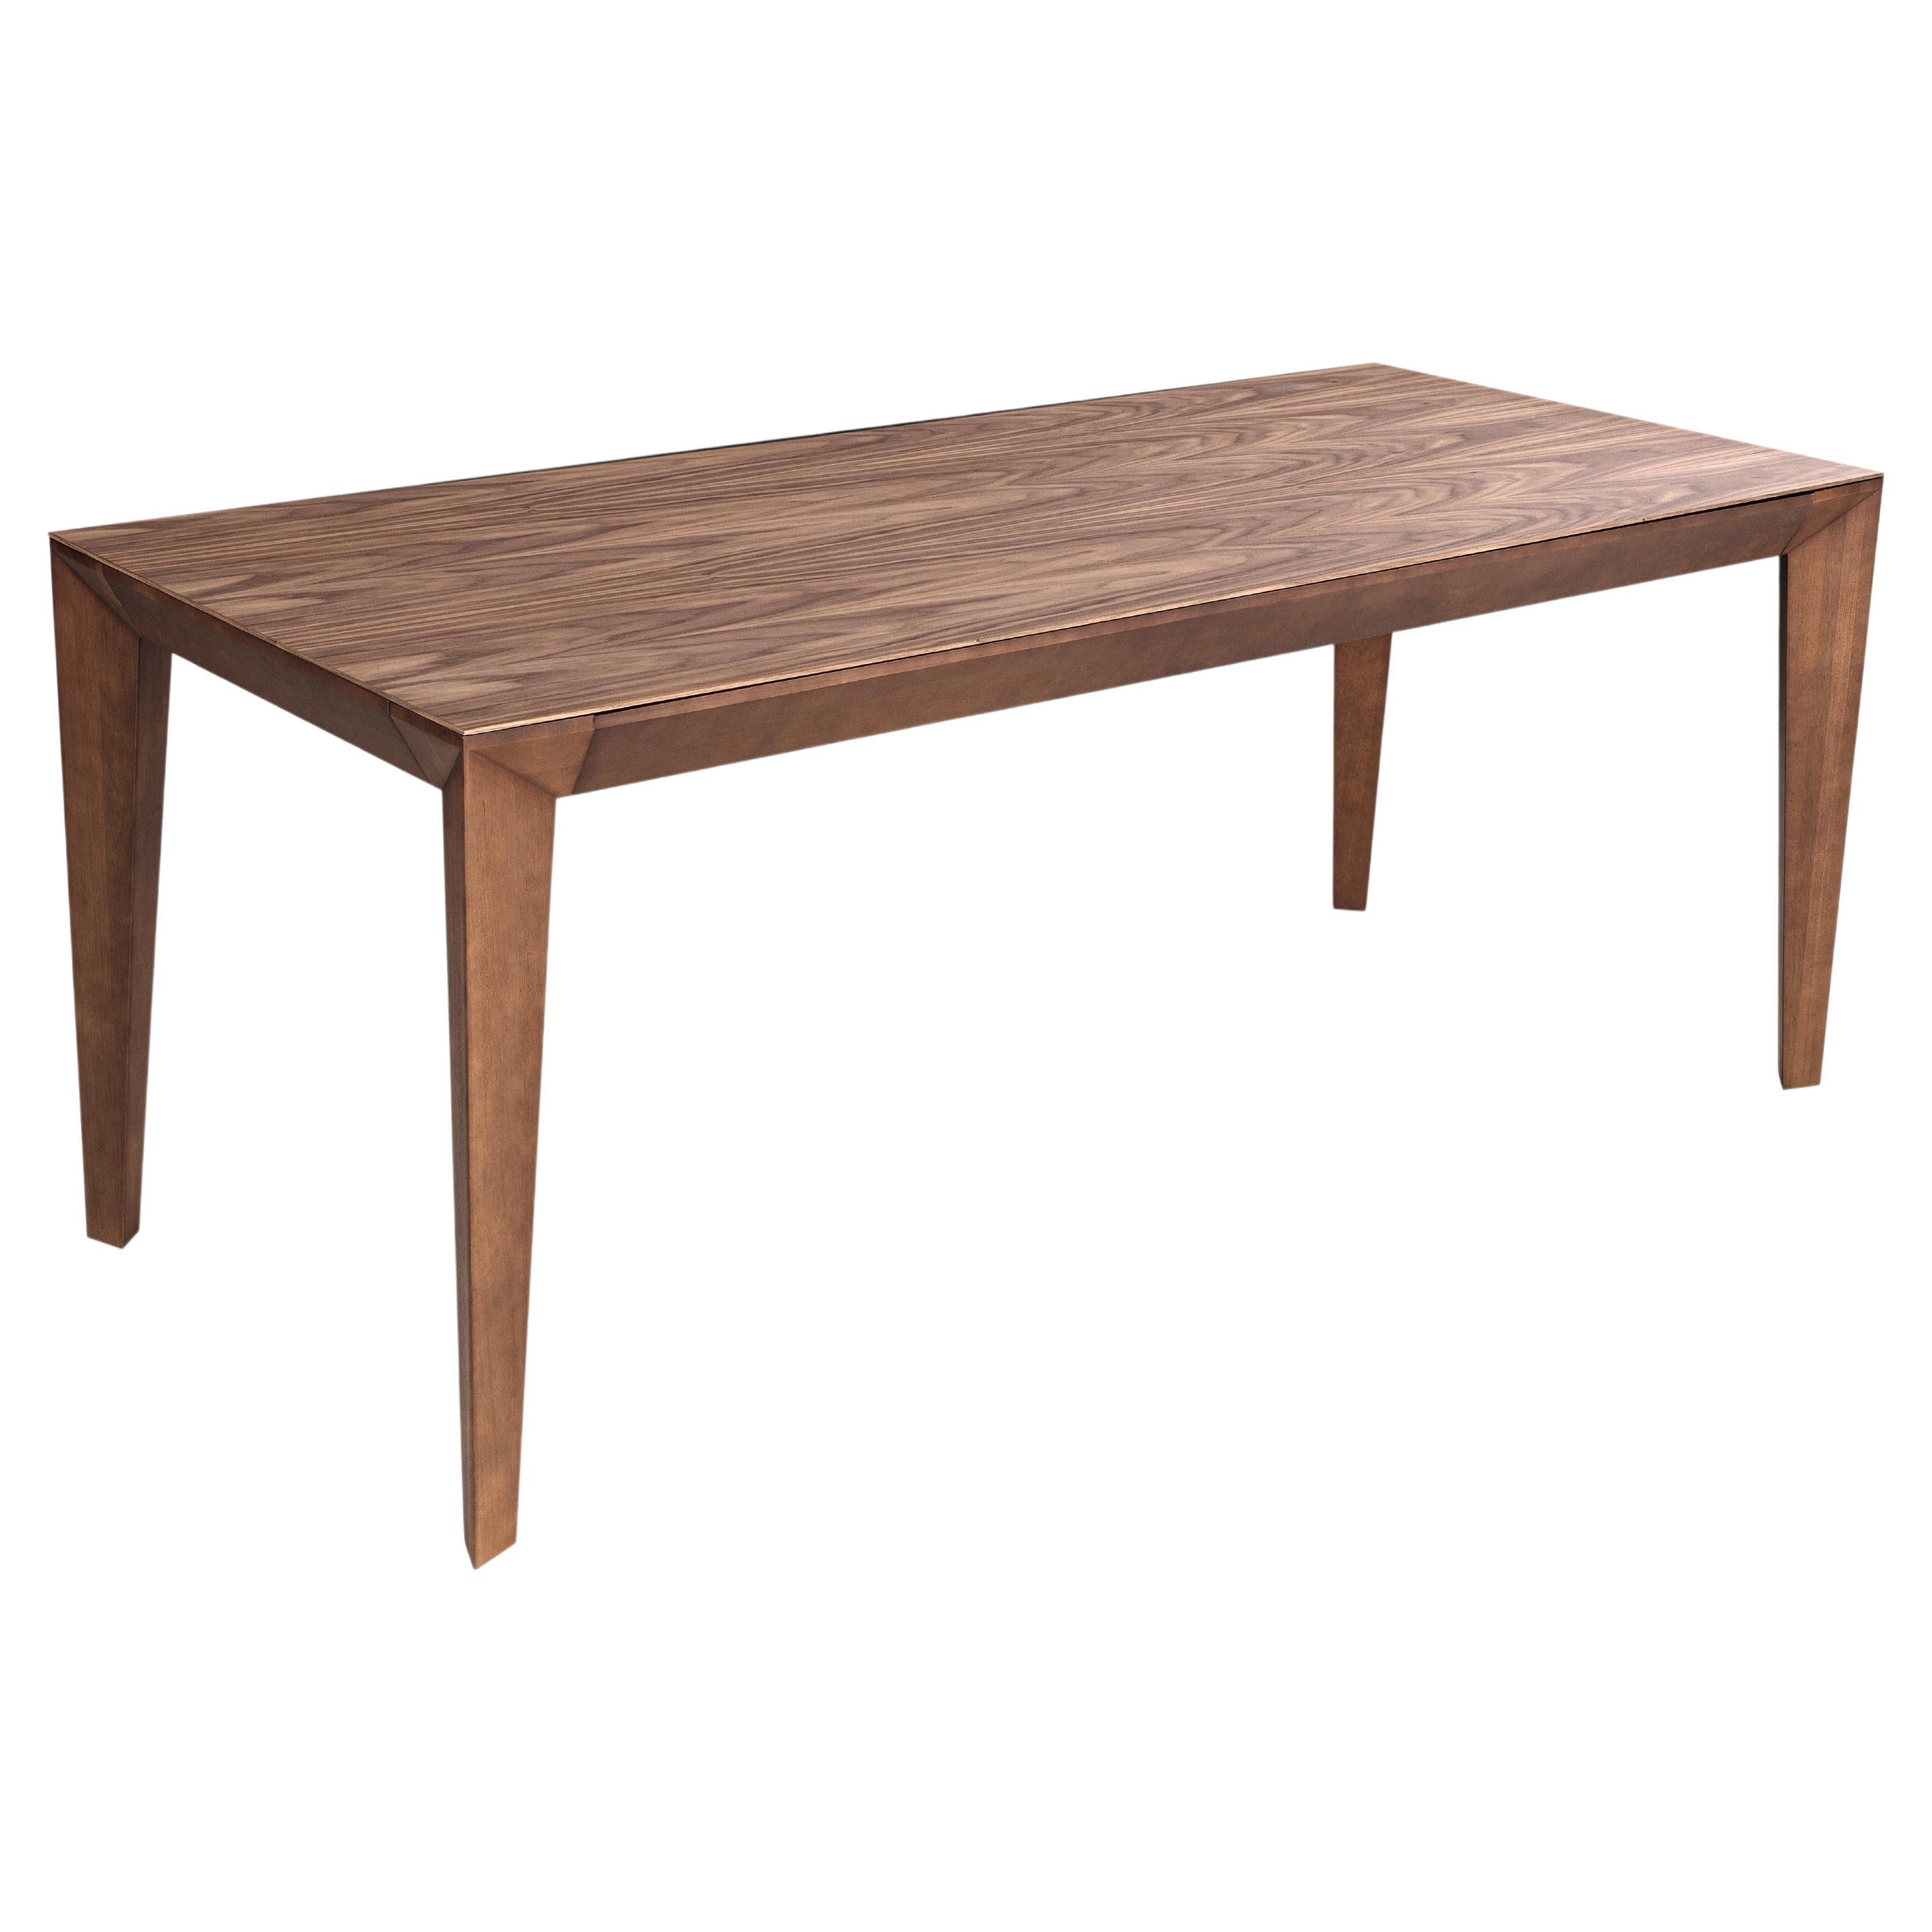 Luce Rectangular Dining Table with a Walnut Wood Veneered Table Top 71''